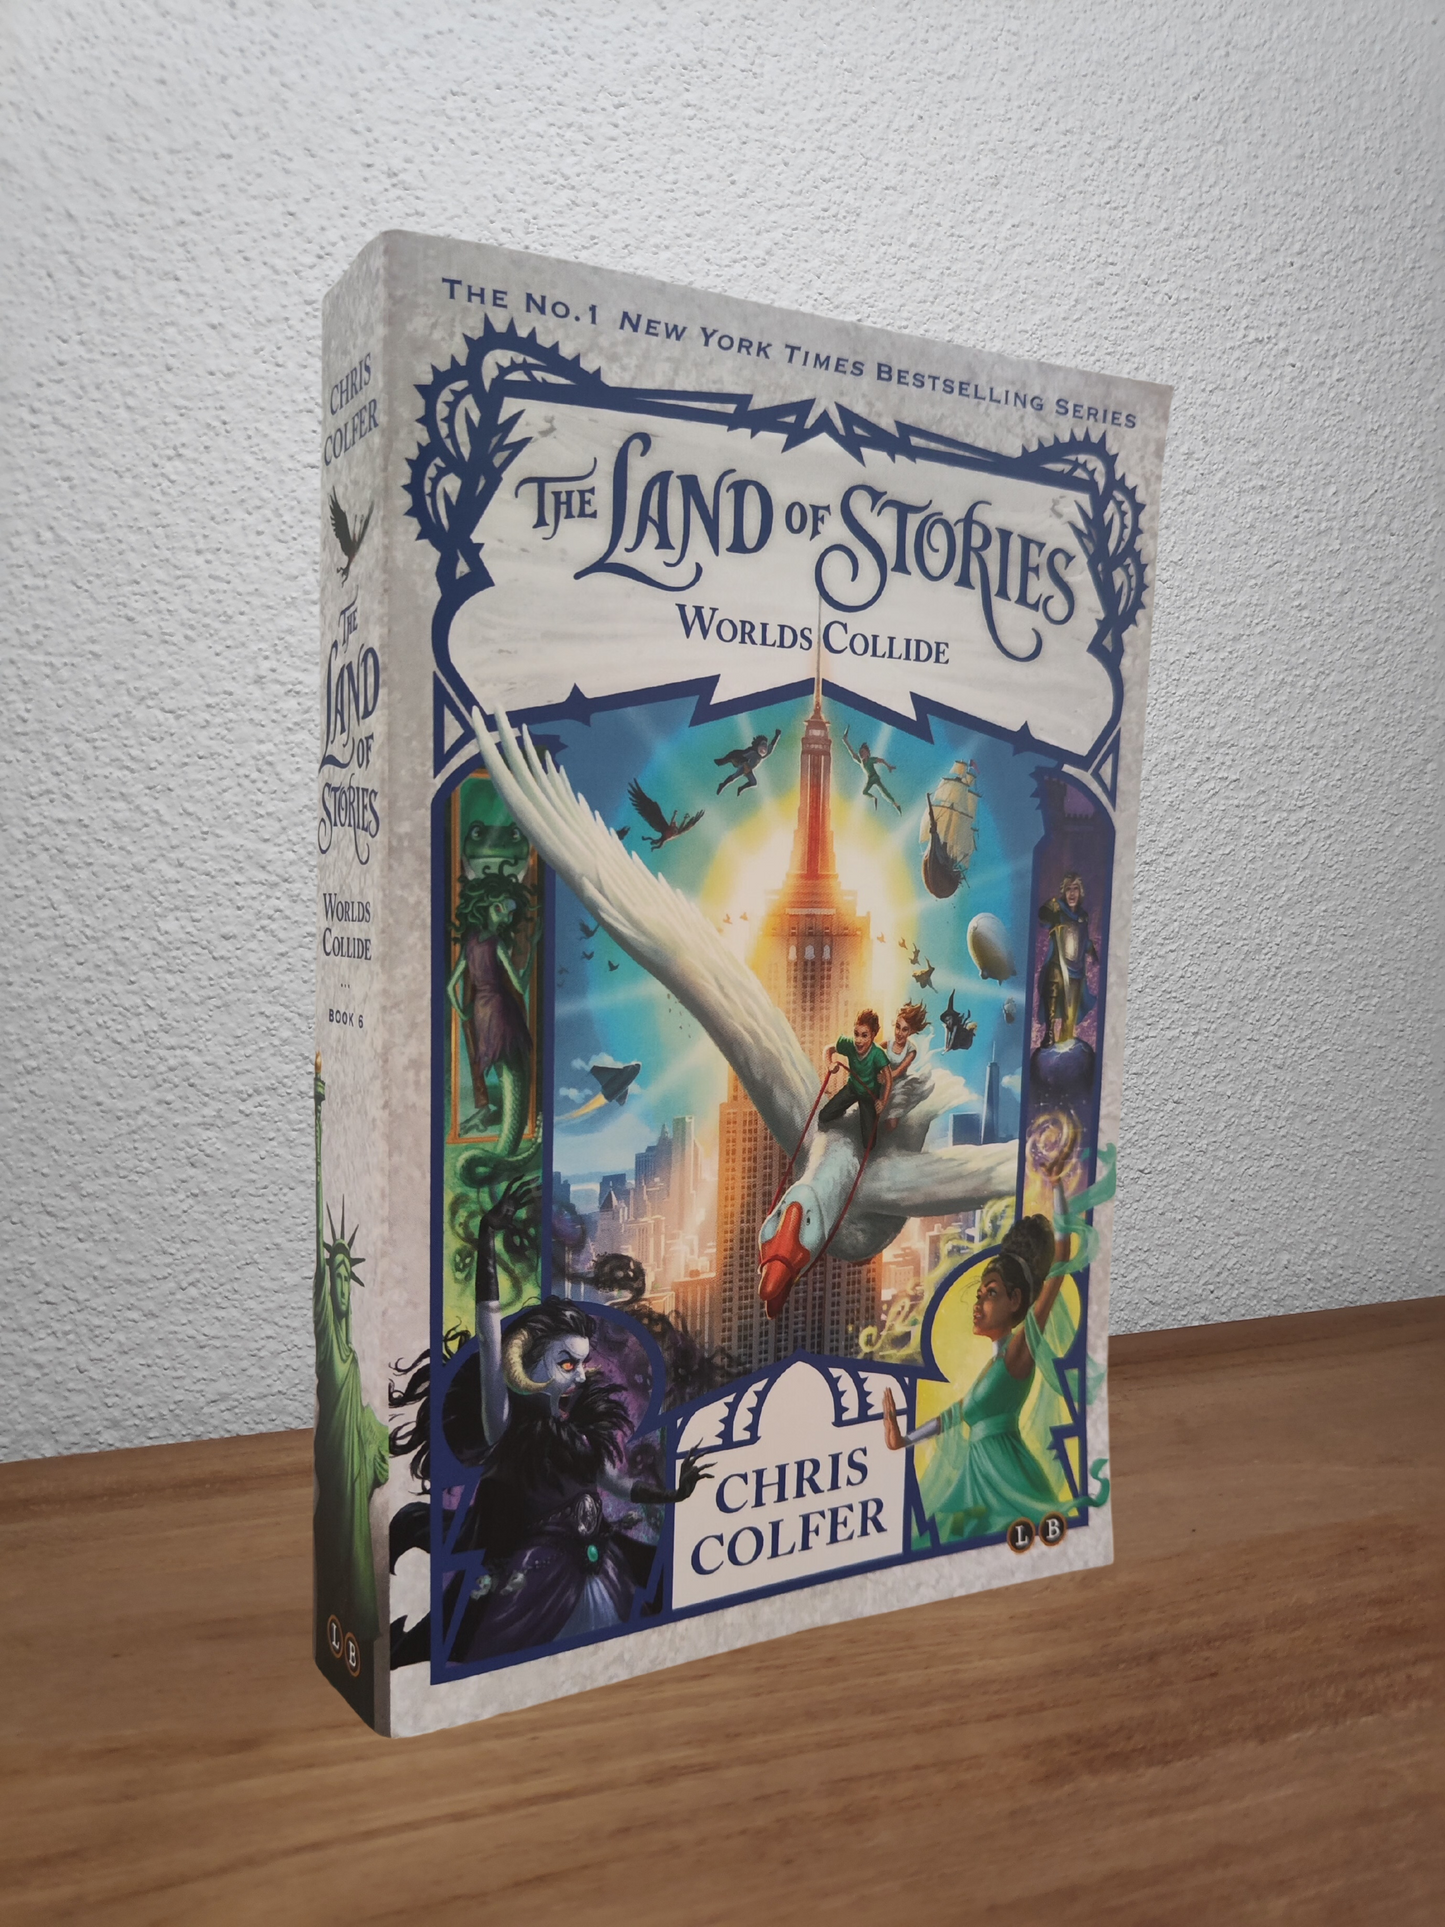 Chris Colfer - The Land of Stories: Worlds Collide #6